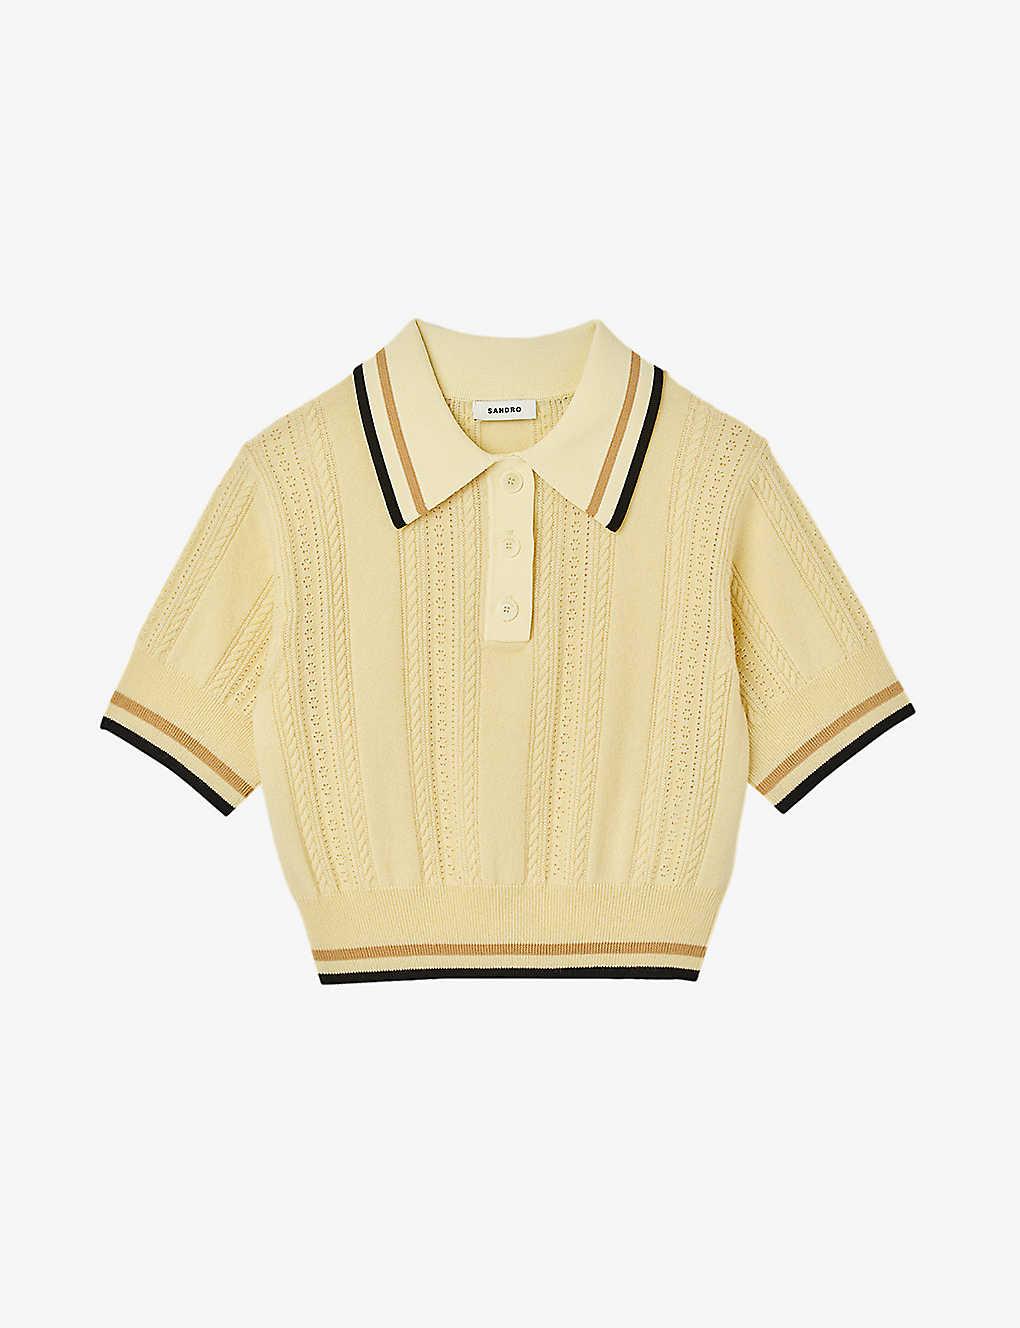 Sandro Knitted Wool And Cashmere-blend Polo Shirt in Natural | Lyst